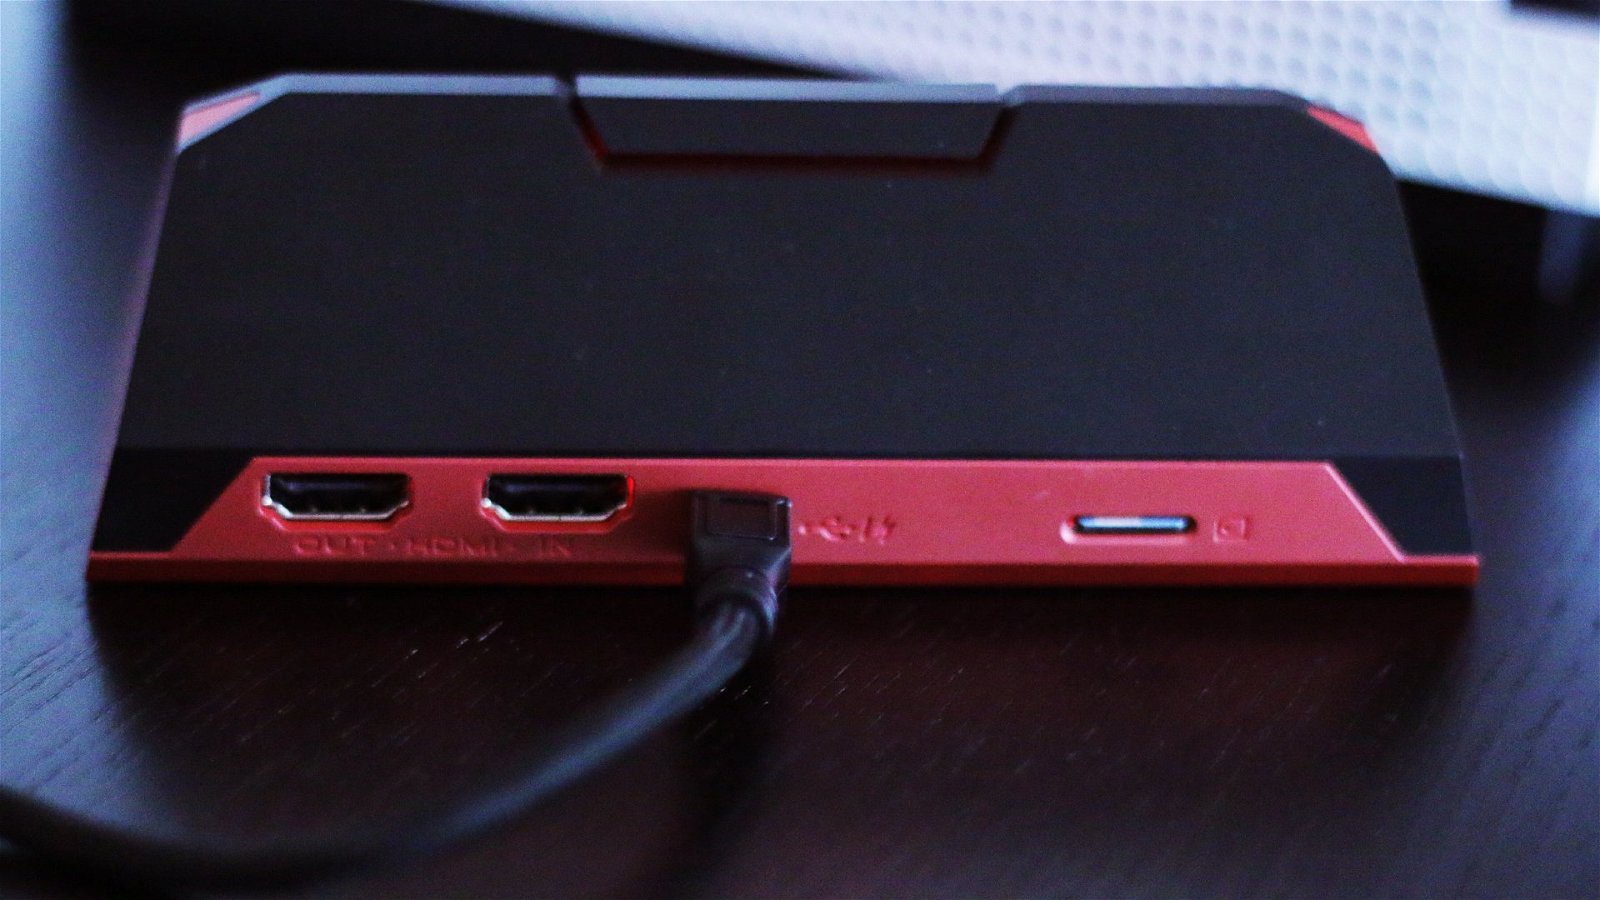 AVerMedia Live Gamer Portable 2 Plus hardware review - Gaming Age